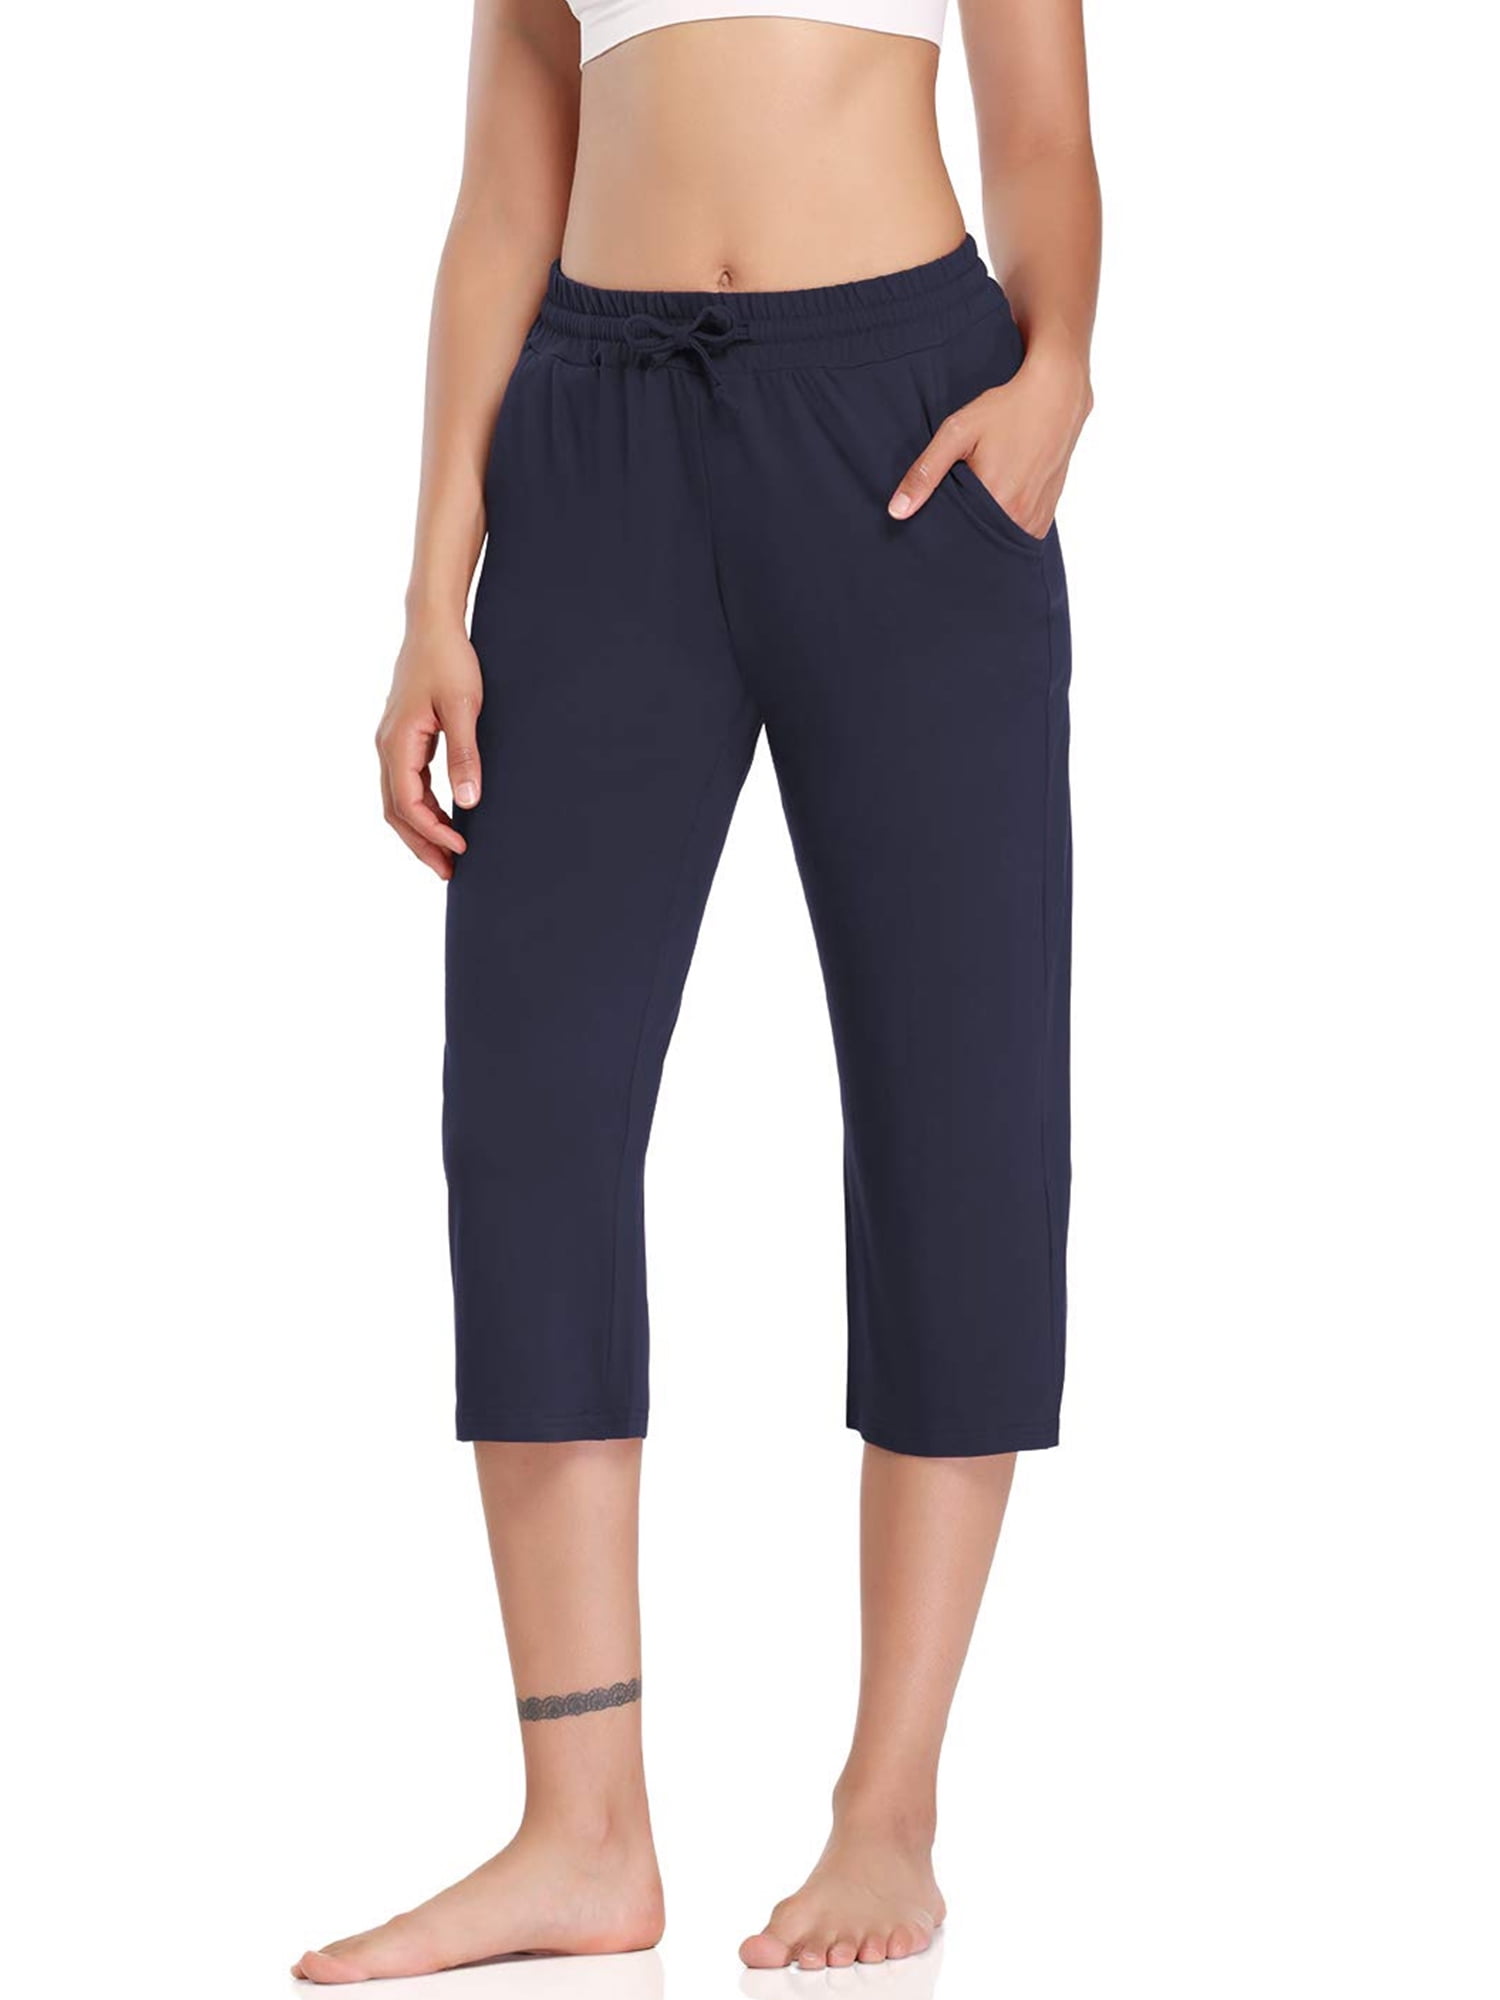 Details about   Womens Capri Yoga Pants With Pockets Gym Workout Fitness Sports Cropped Leggings 